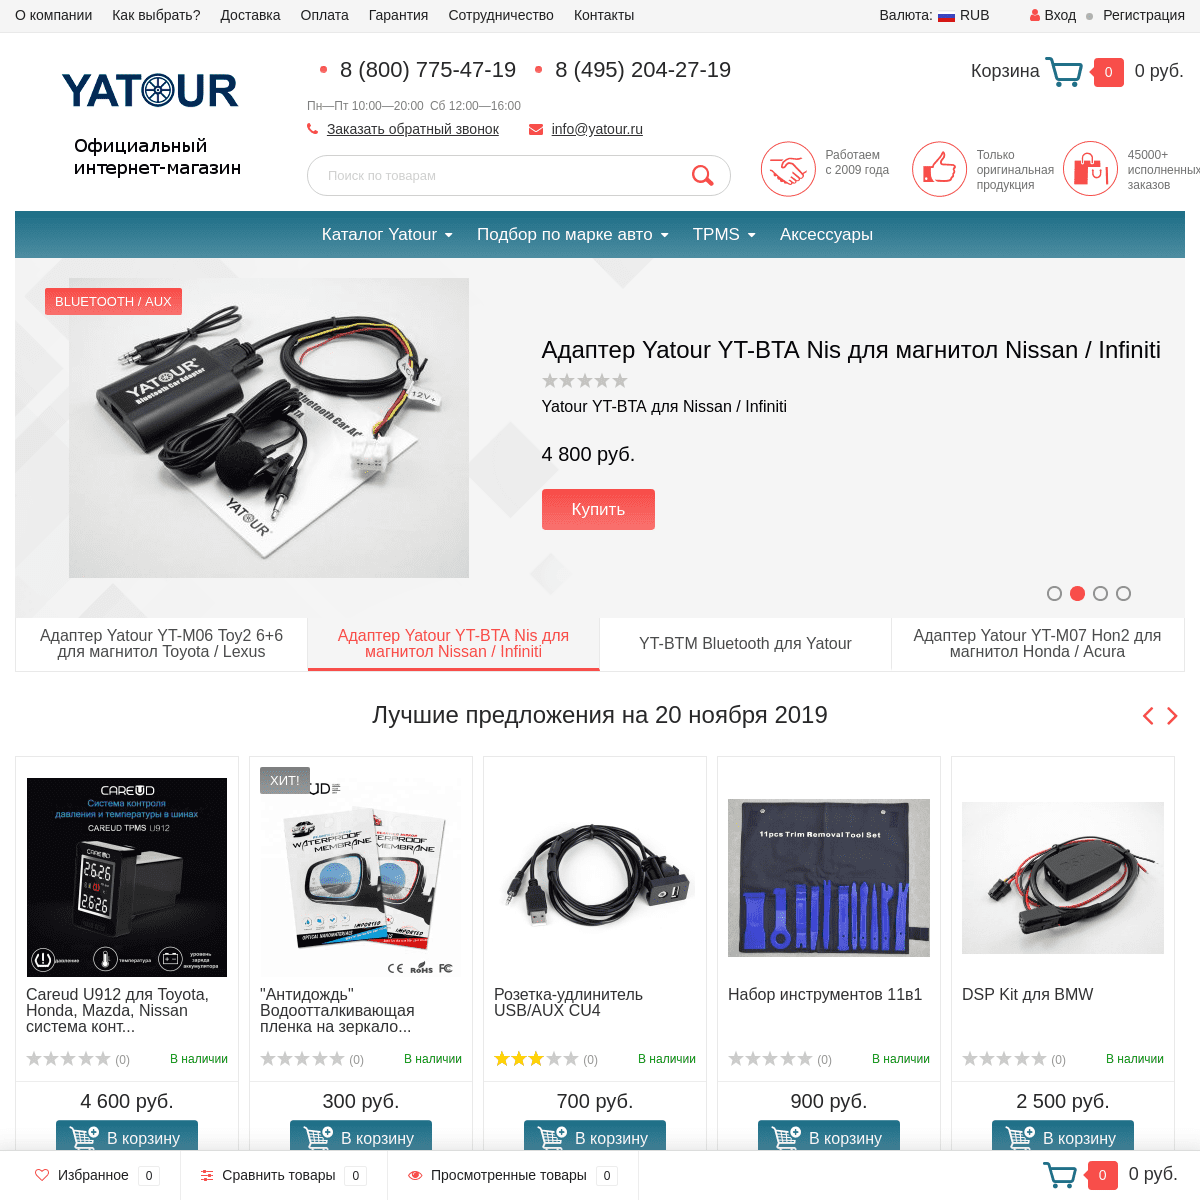 A complete backup of yatour.ru